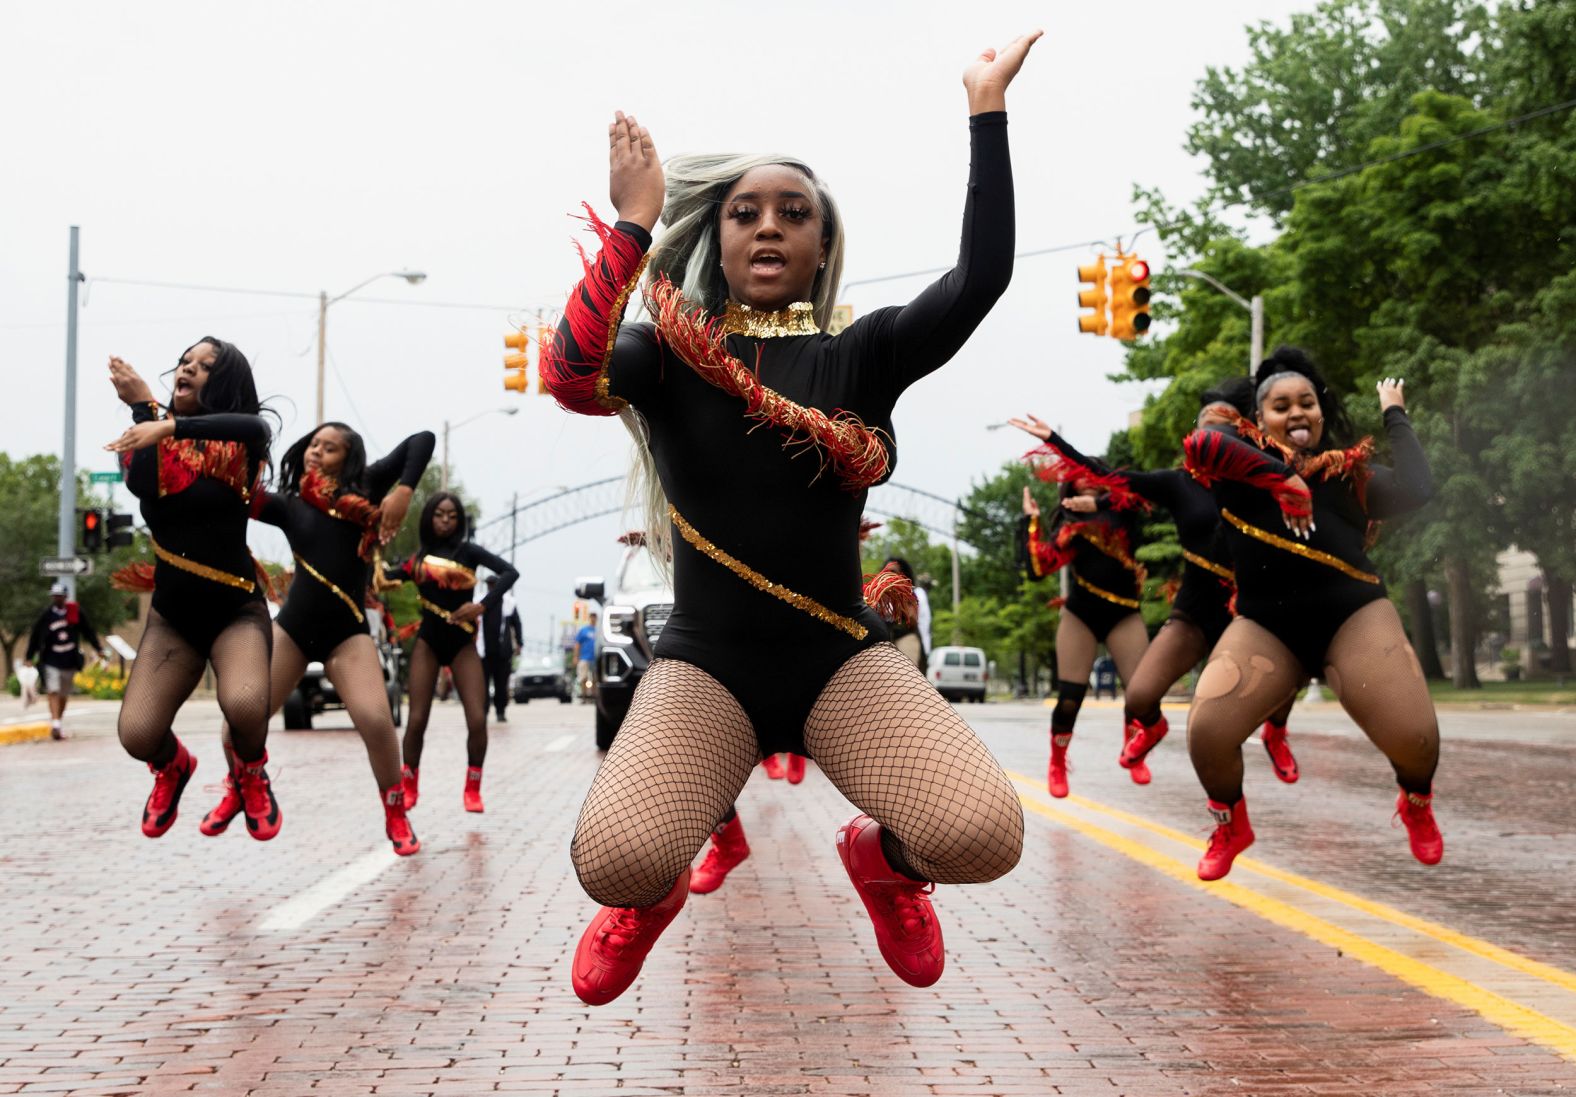 Dance captain Shair'Mae Harris leads members from the For The Love of Dance Studio during a parade to celebrate Juneteenth in Flint.